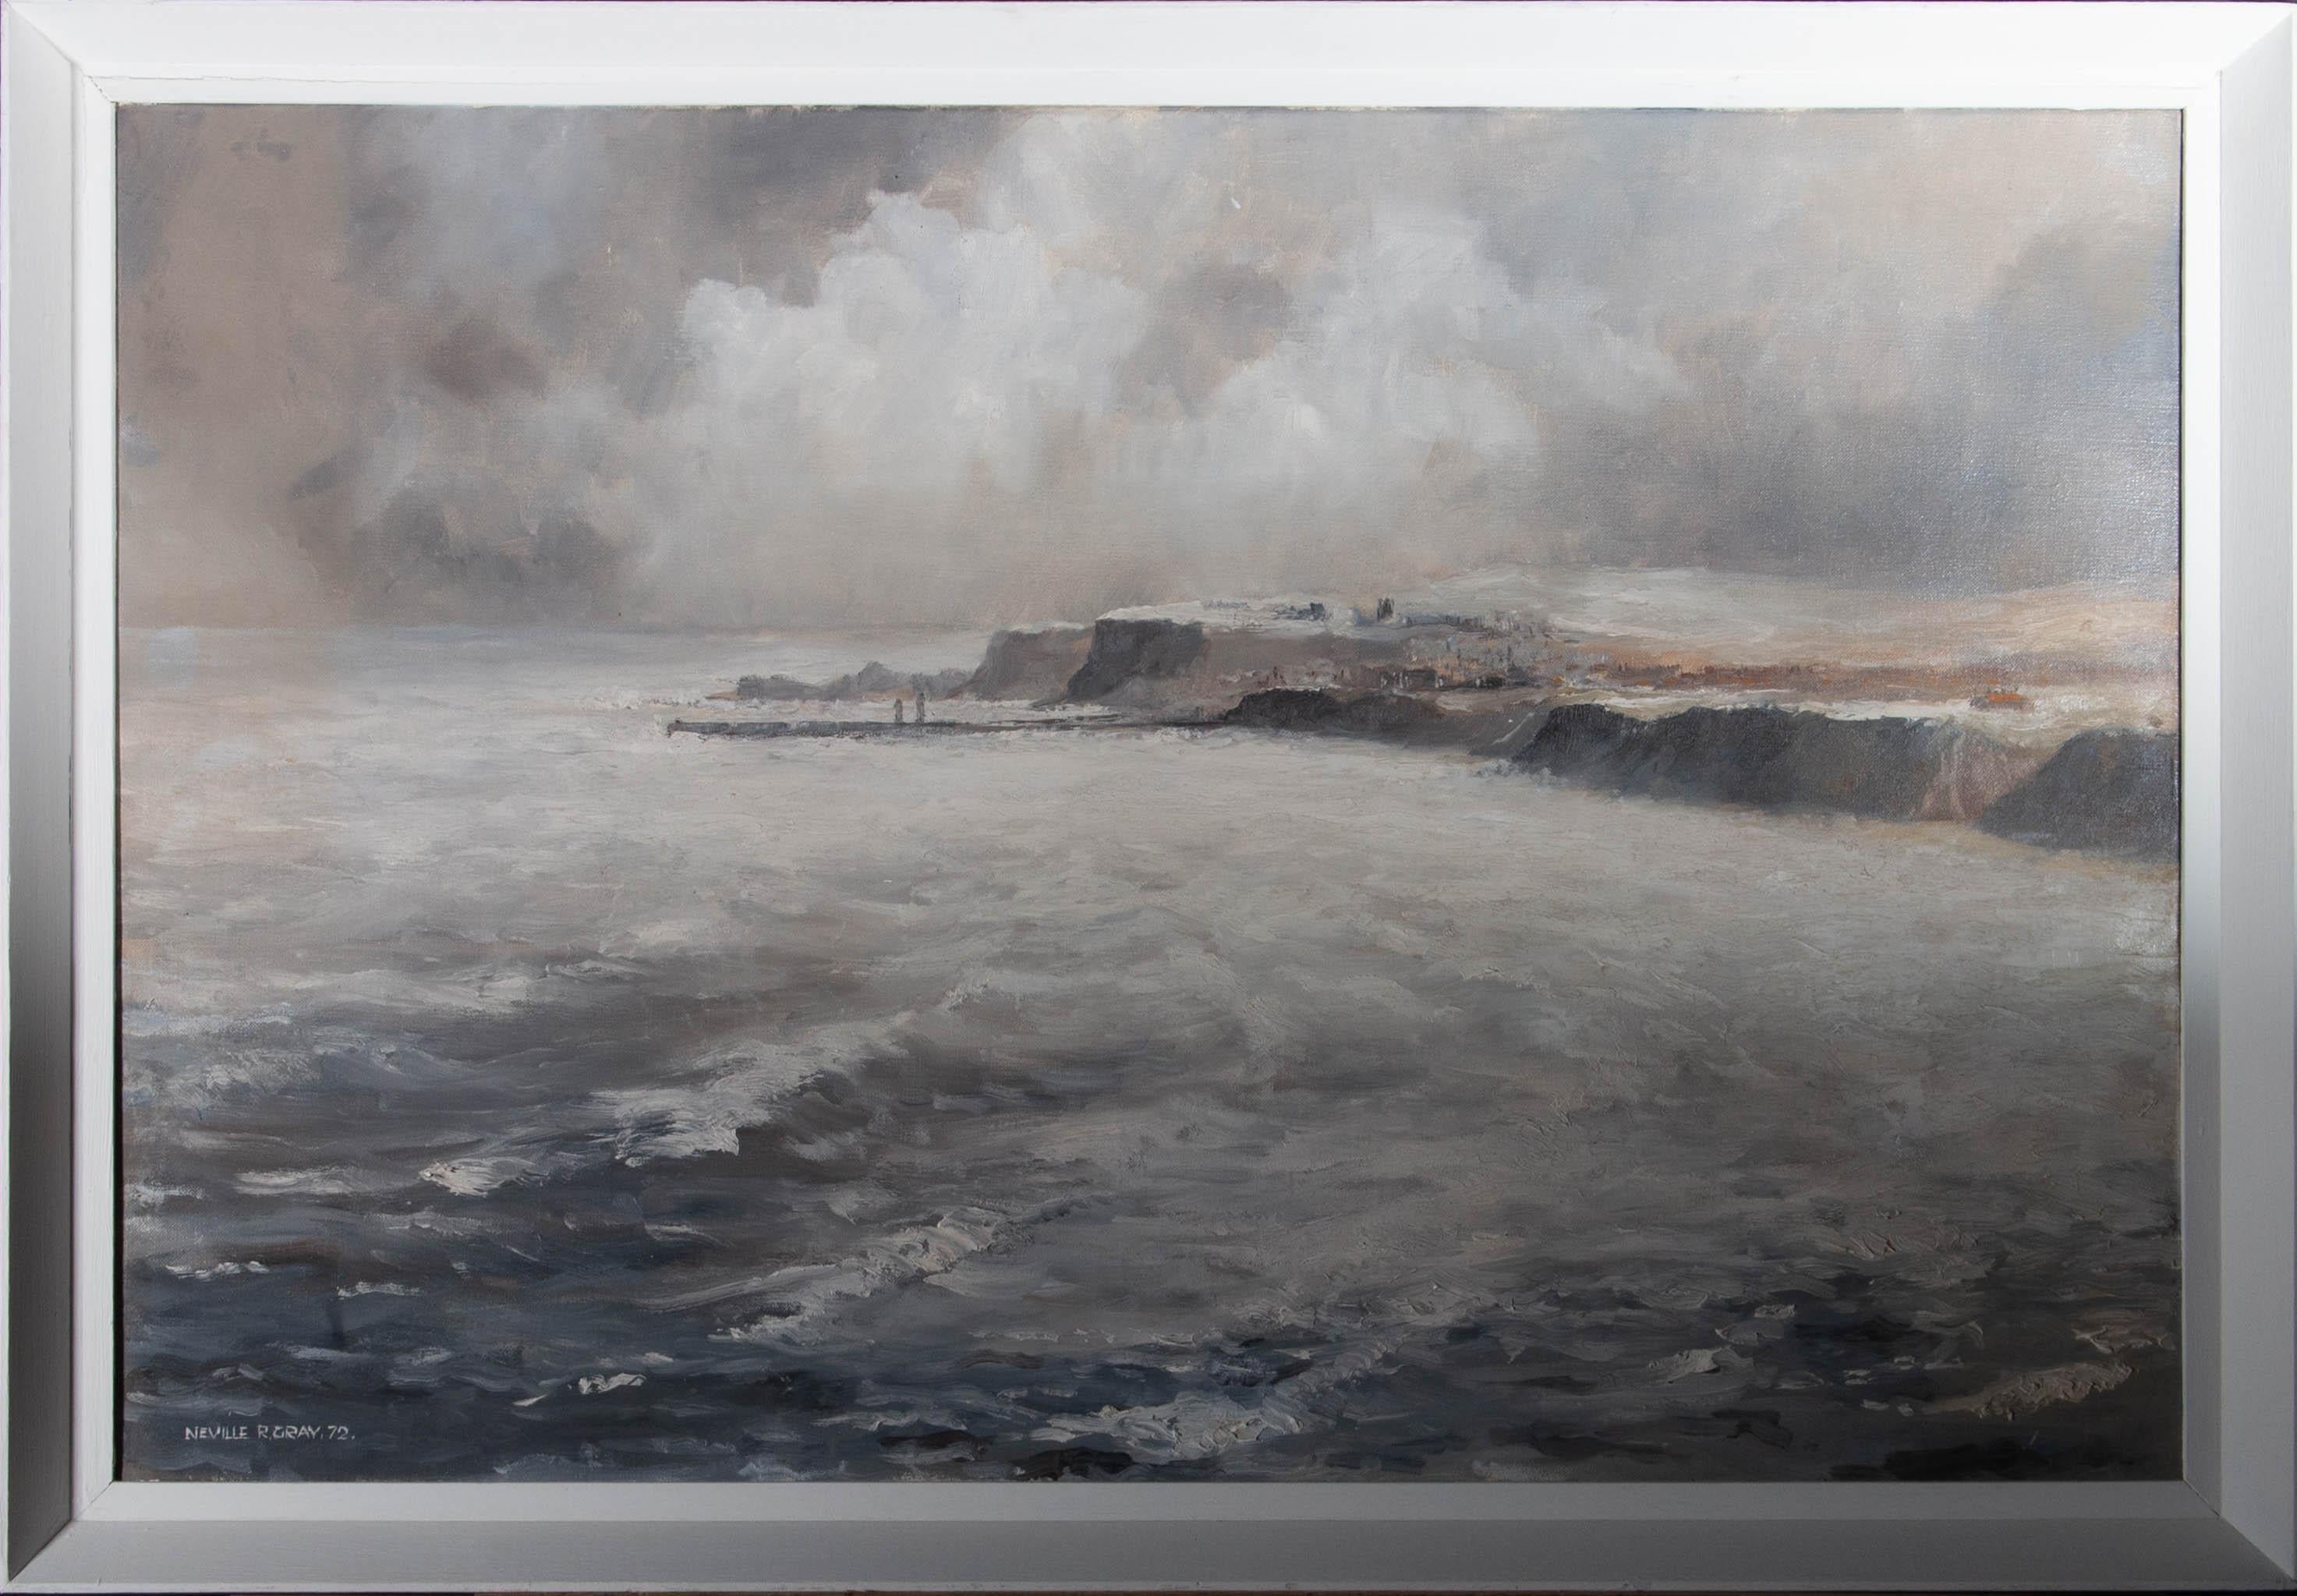 An atmospheric painting of a stormy seascape. Presented in a white painted wooden frame. Signed and dated to the lower-left edge. On canvas on stretchers.
